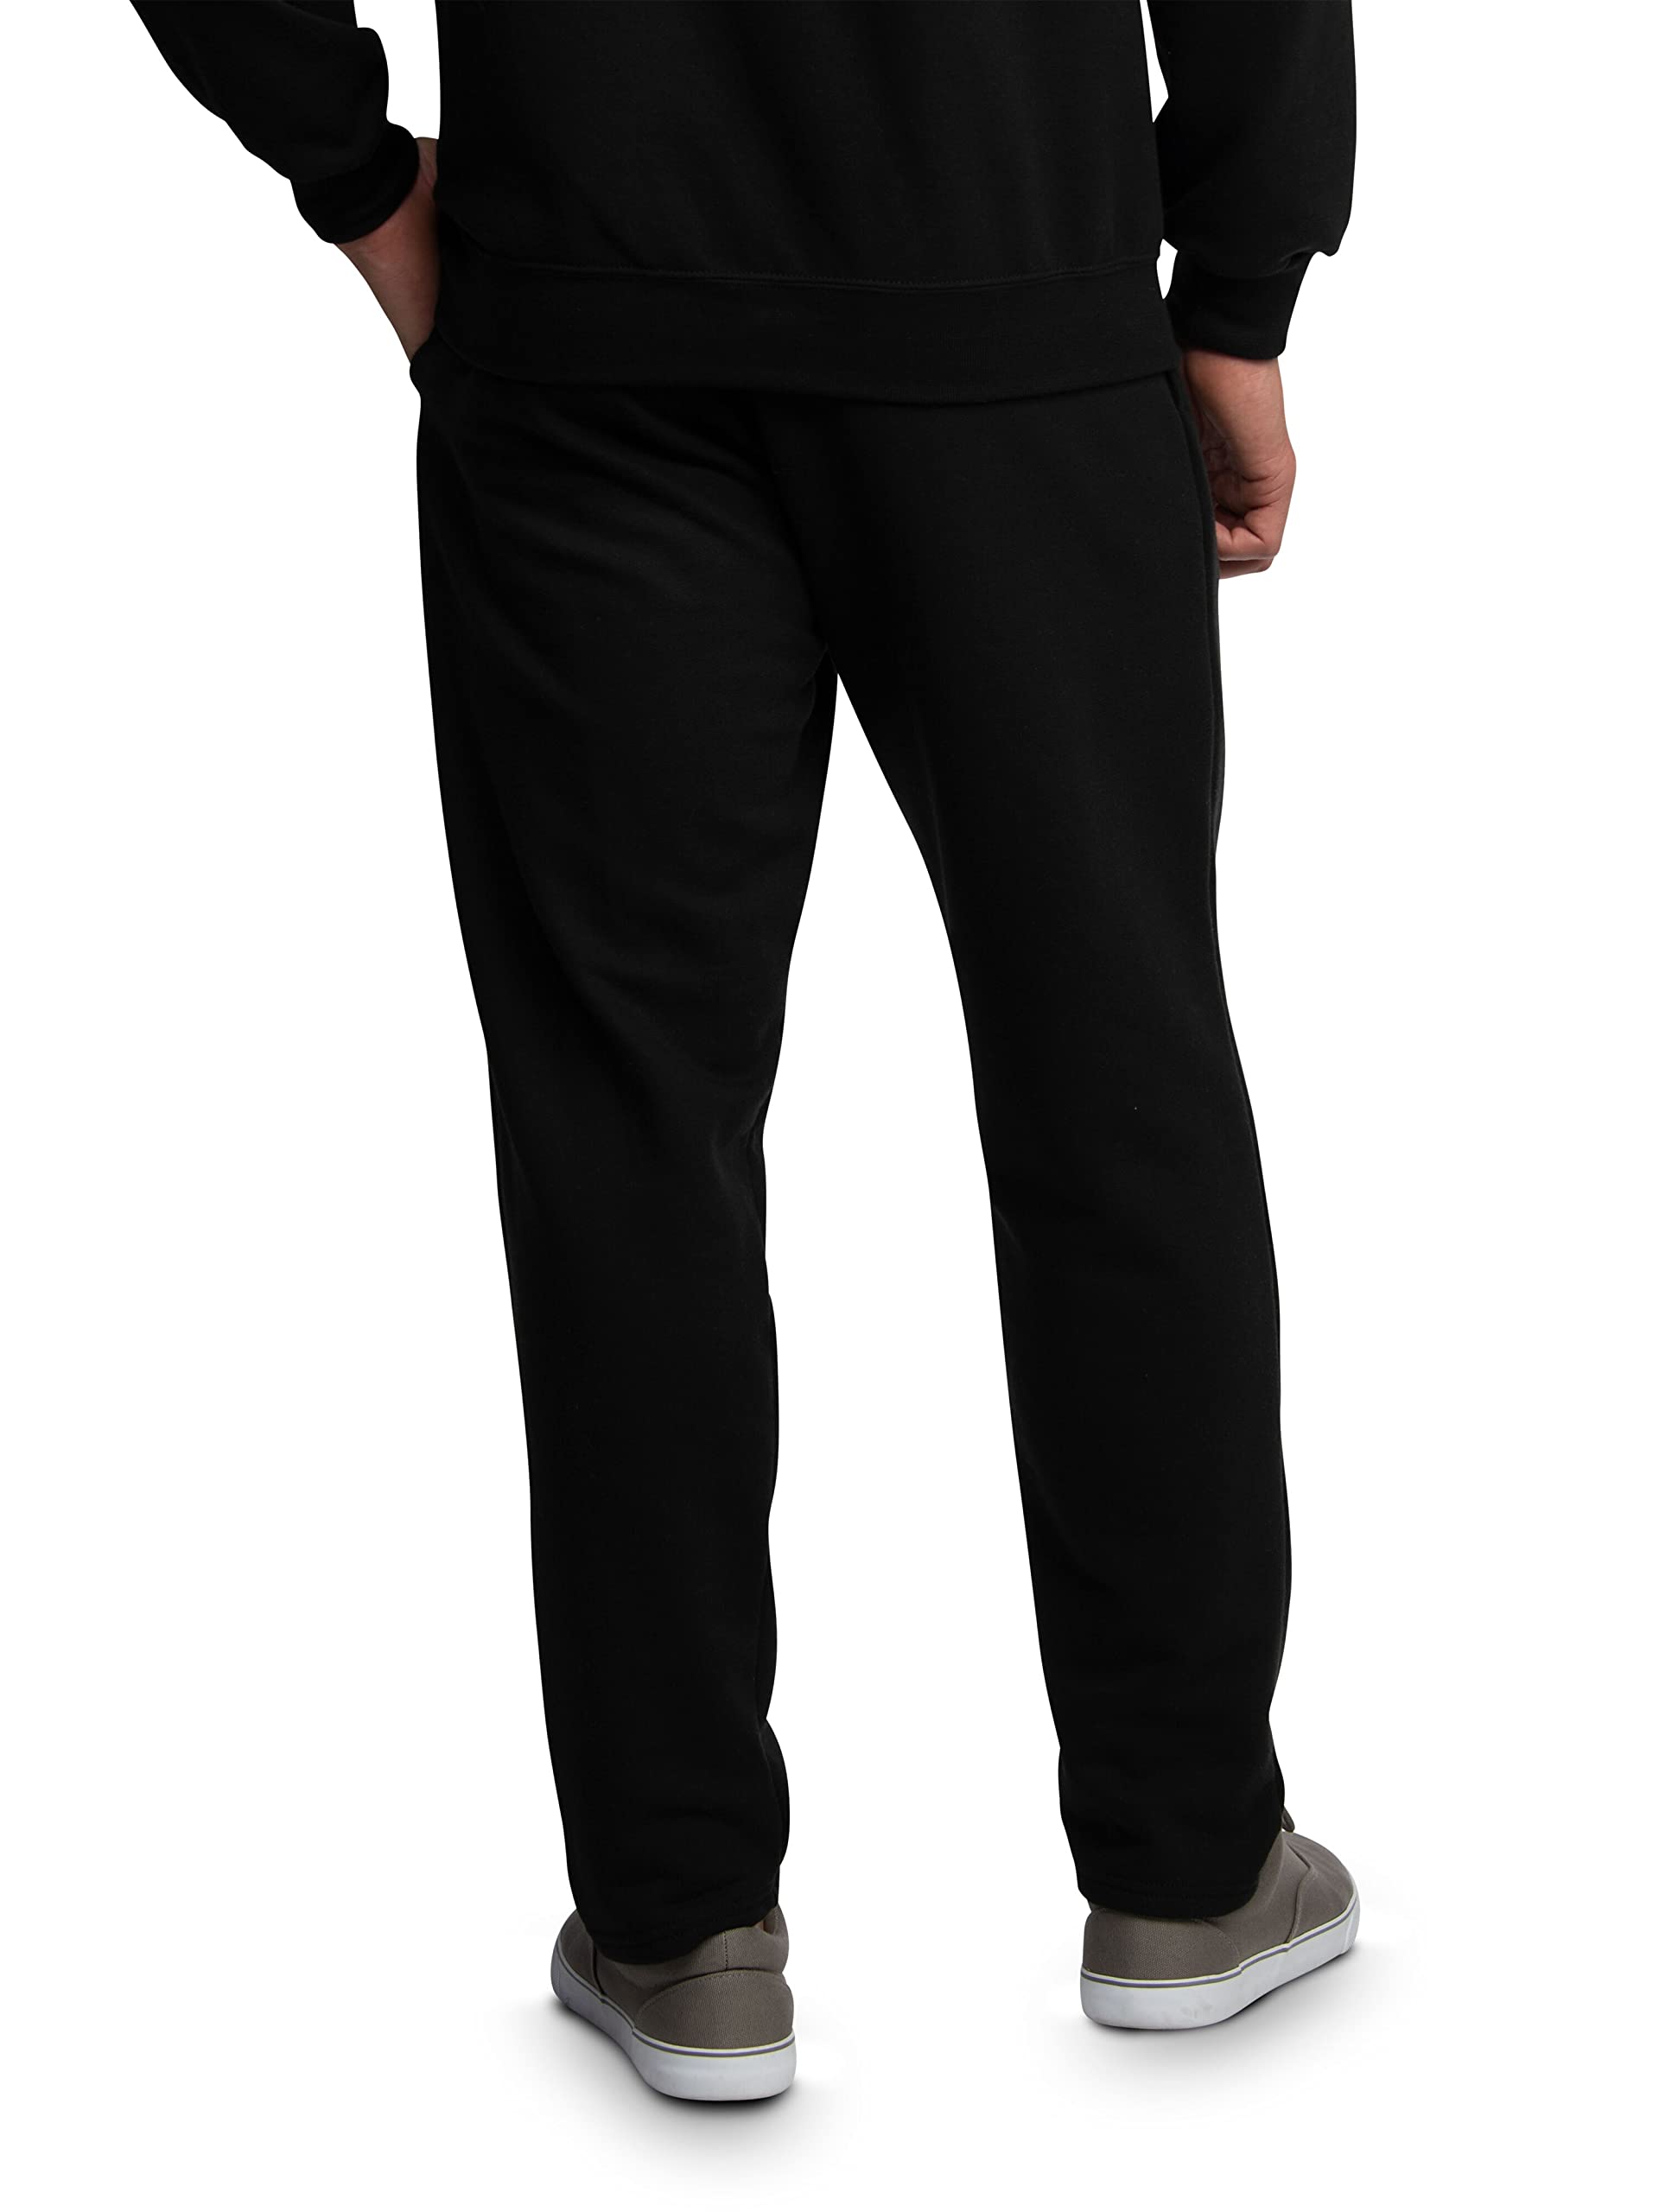 Fruit of the Loom Men's Eversoft Fleece Sweatpants with Pockets, Moisture Wicking & Breathable